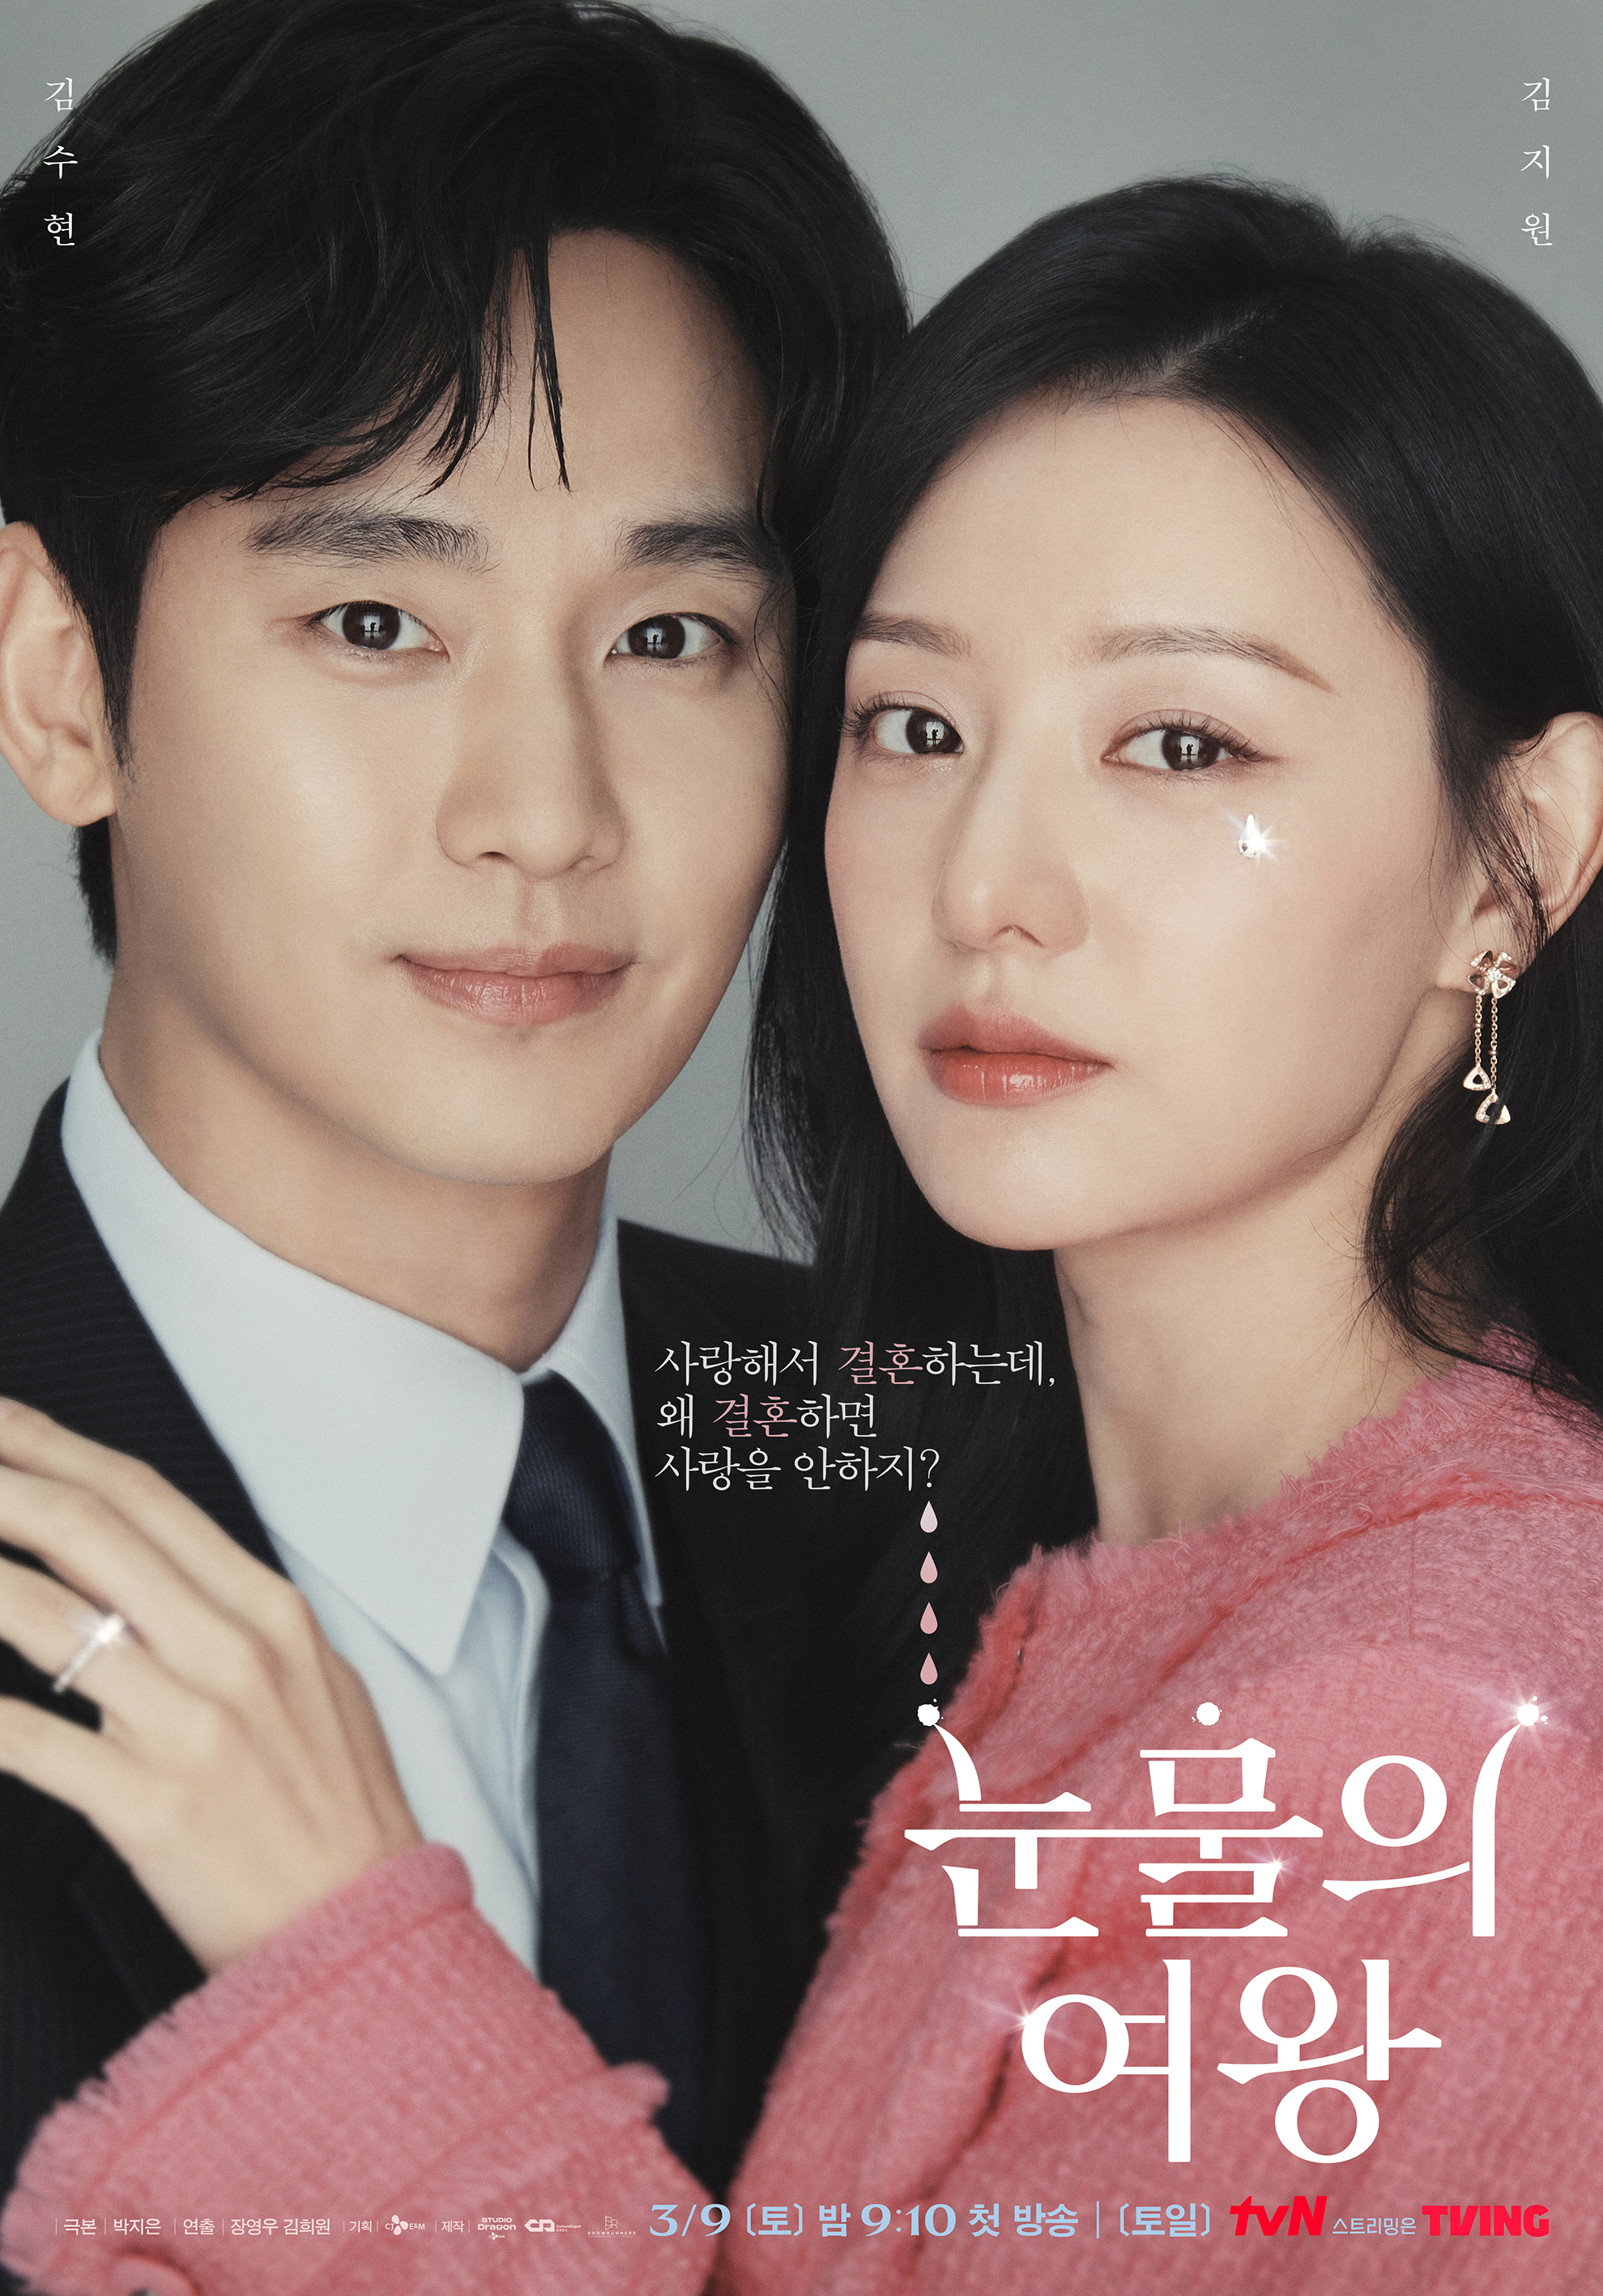 Kim Soo Hyun And Kim Ji Won Drift Apart After Marriage In “Queen Of Tears” Posters